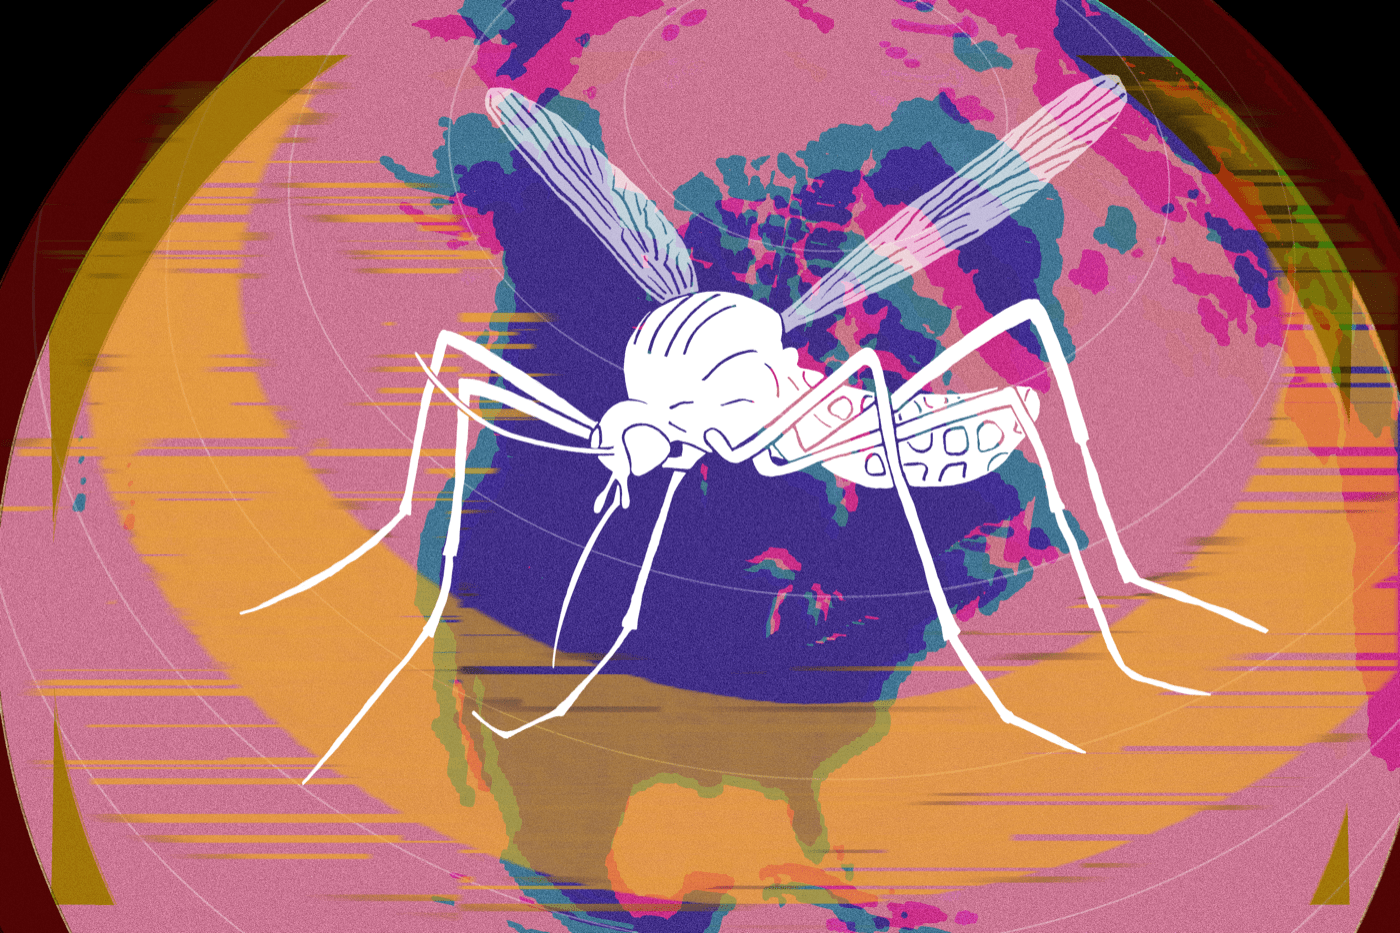 a fuzzy illustration of a large mosquito on top of north america on a globe